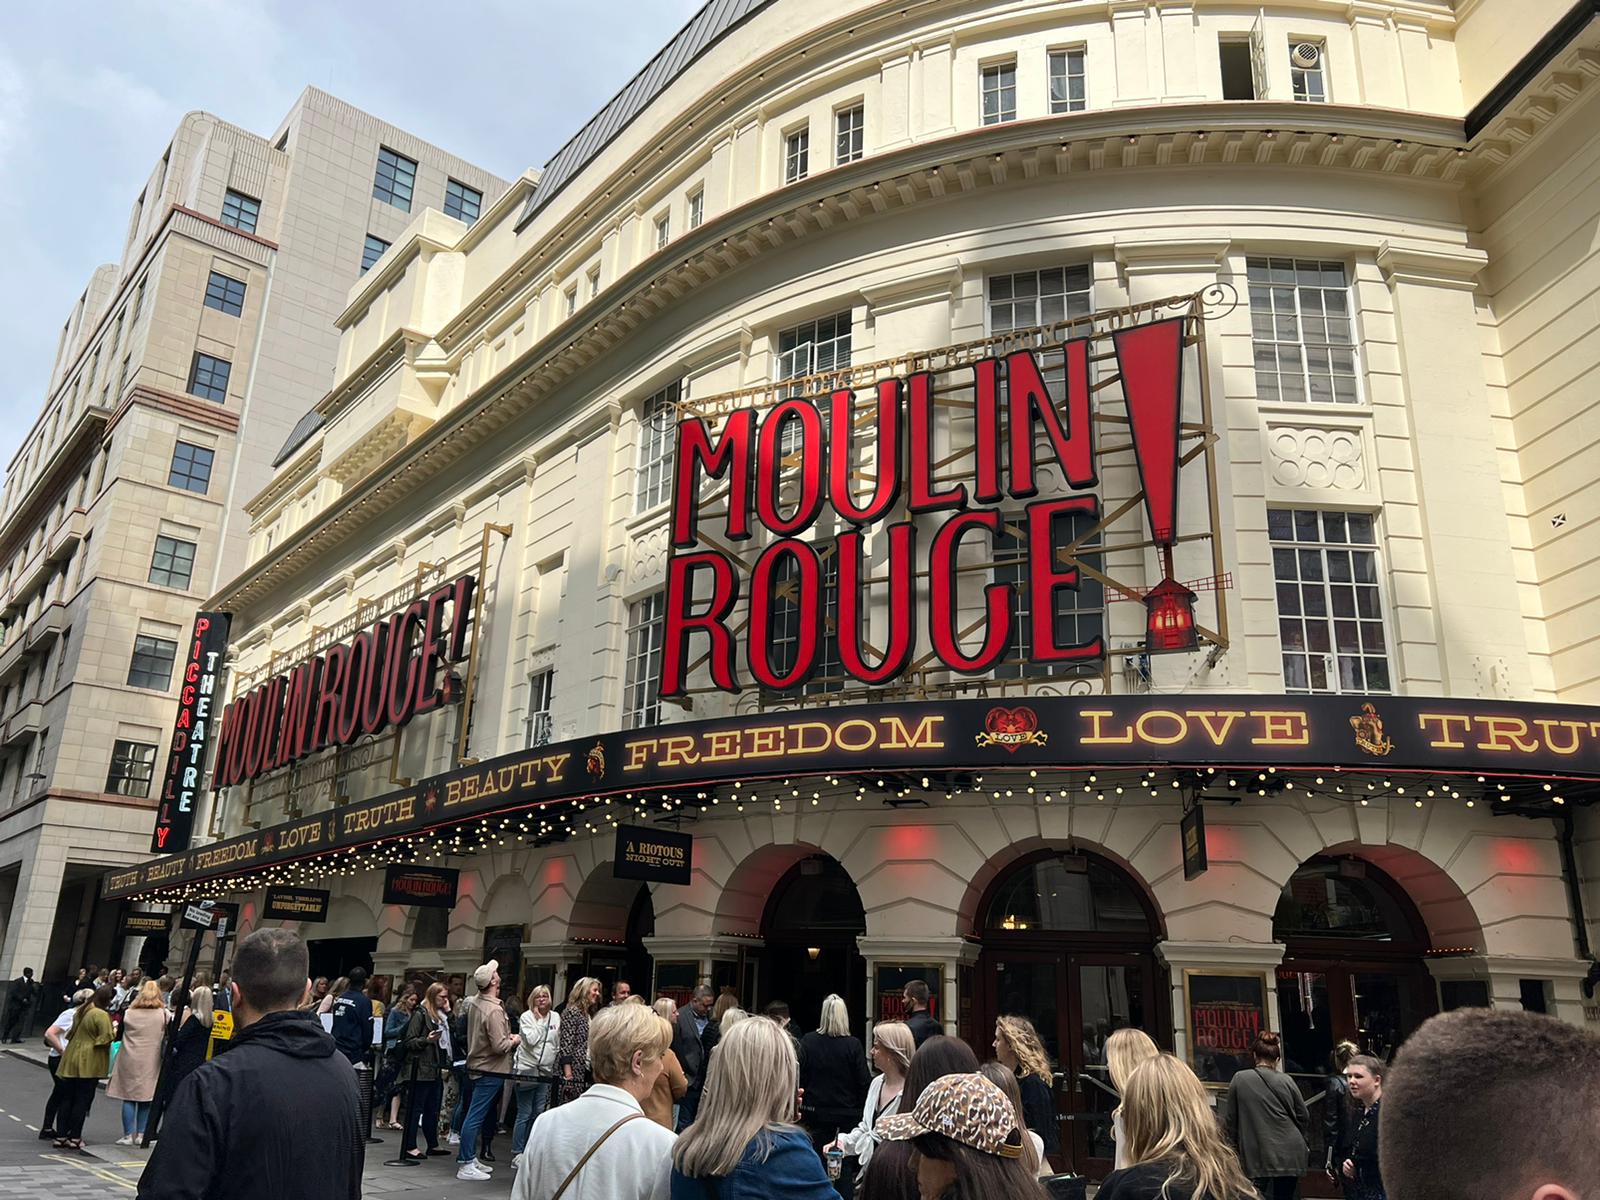 Outside of a theatre in London with a sign for Moulin Rouge